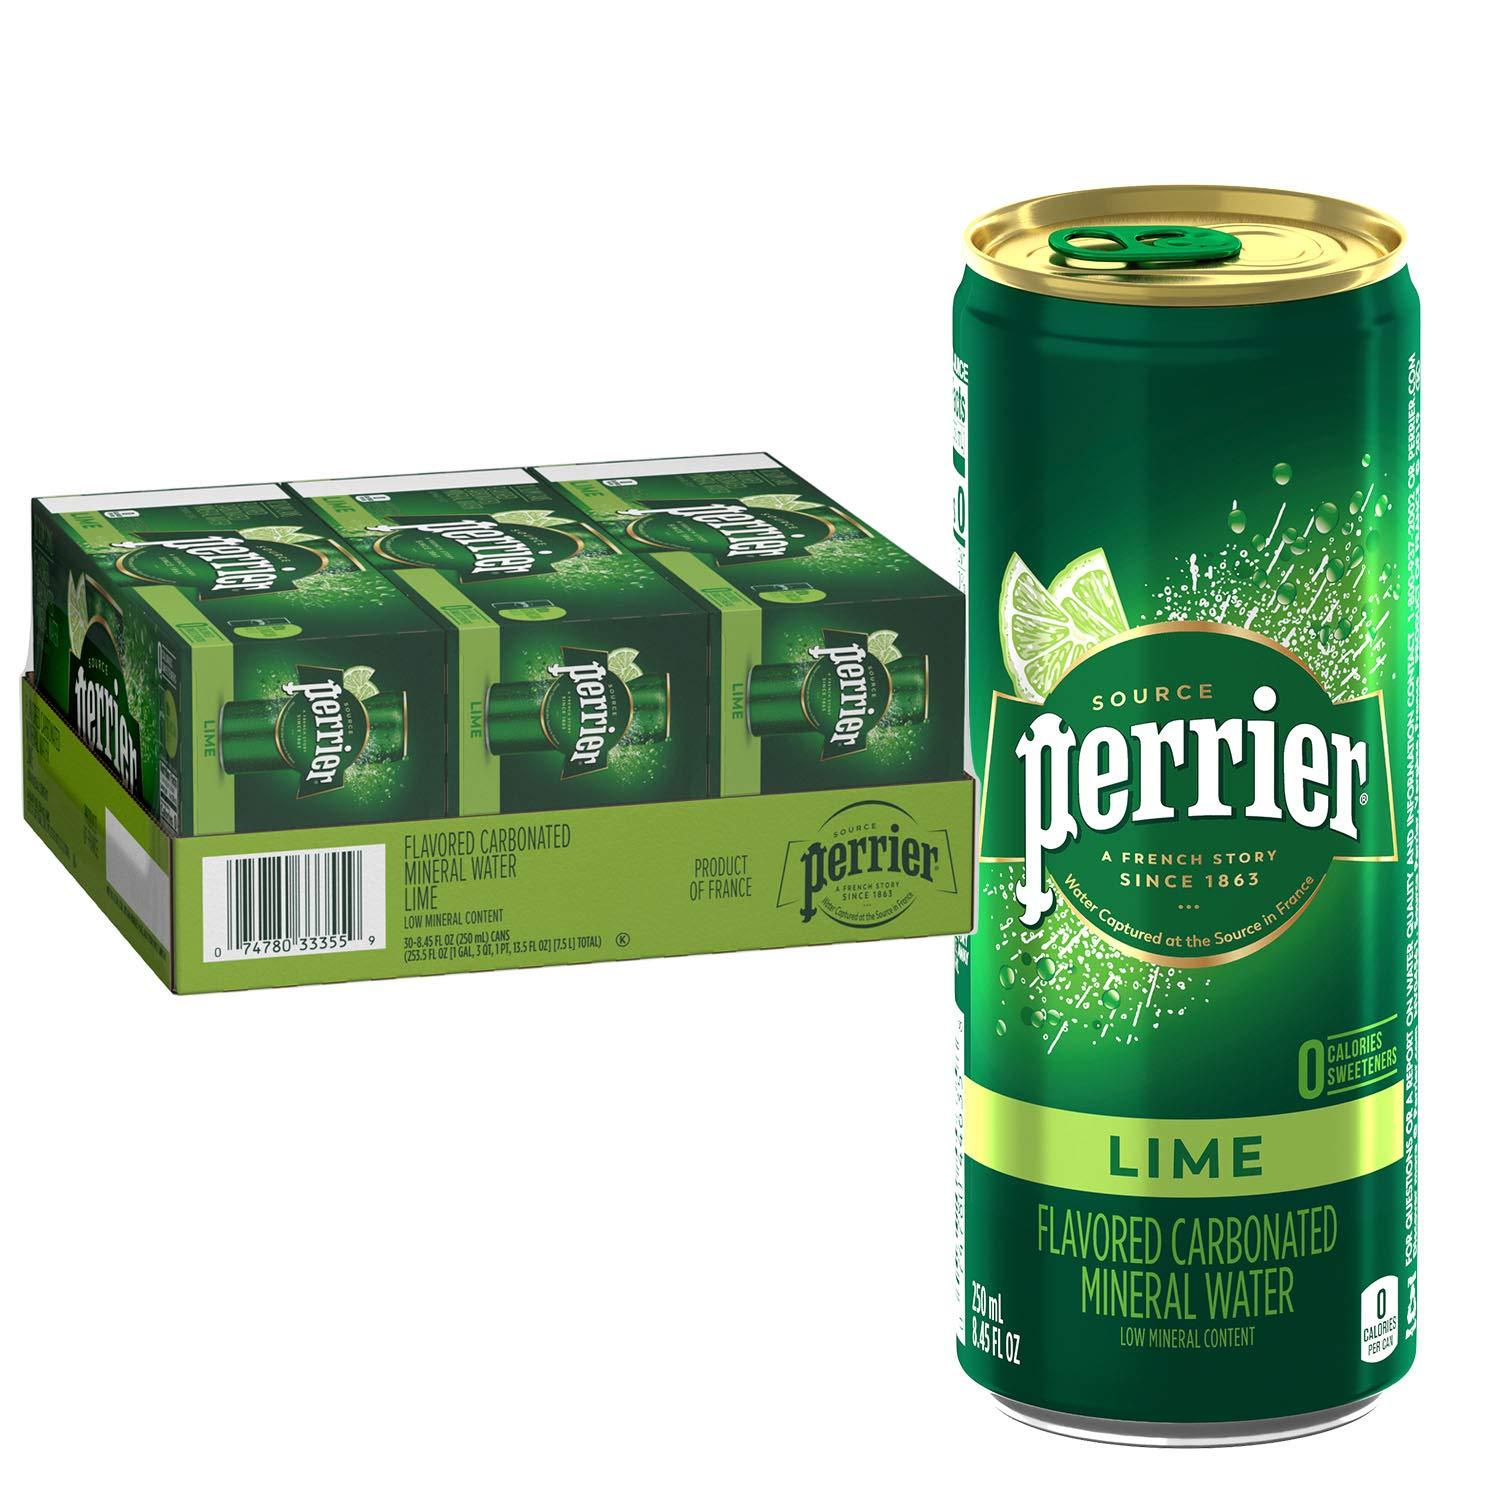 30 Perrier Lime Carbonated Mineral Slim Water for $9.52 Shipped